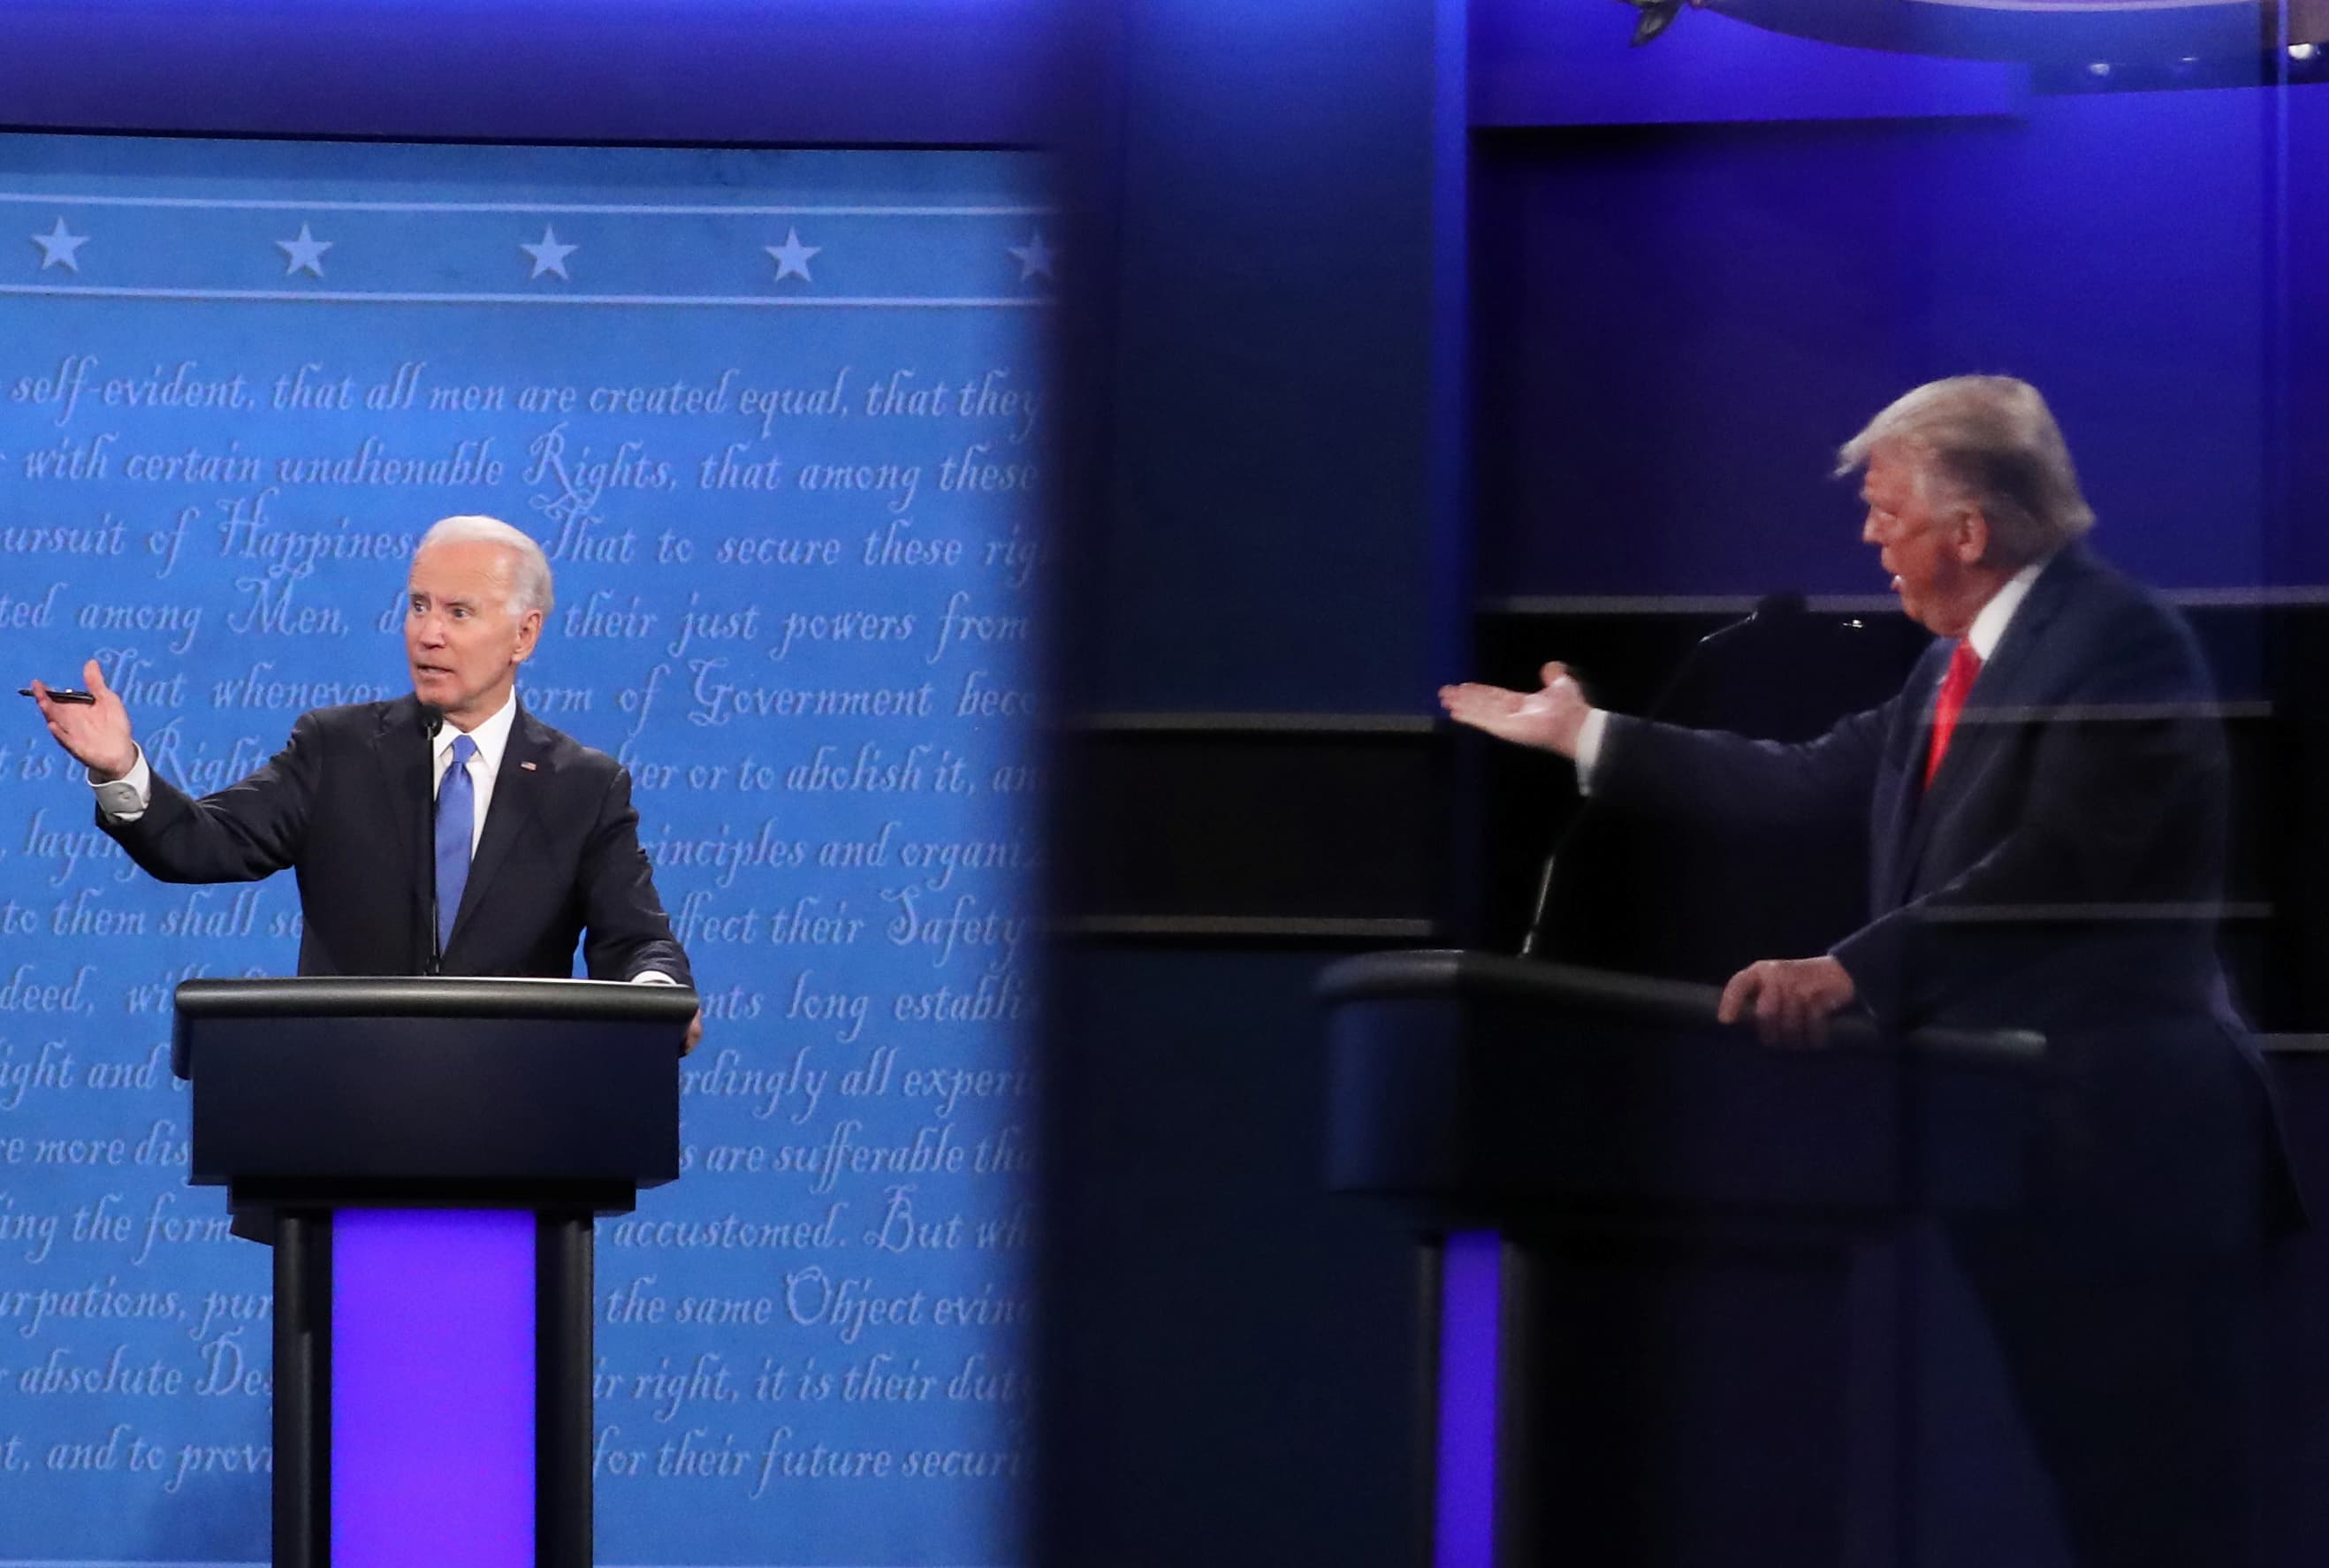 US News Organizations Call for Biden, Trump to Commit to Debates